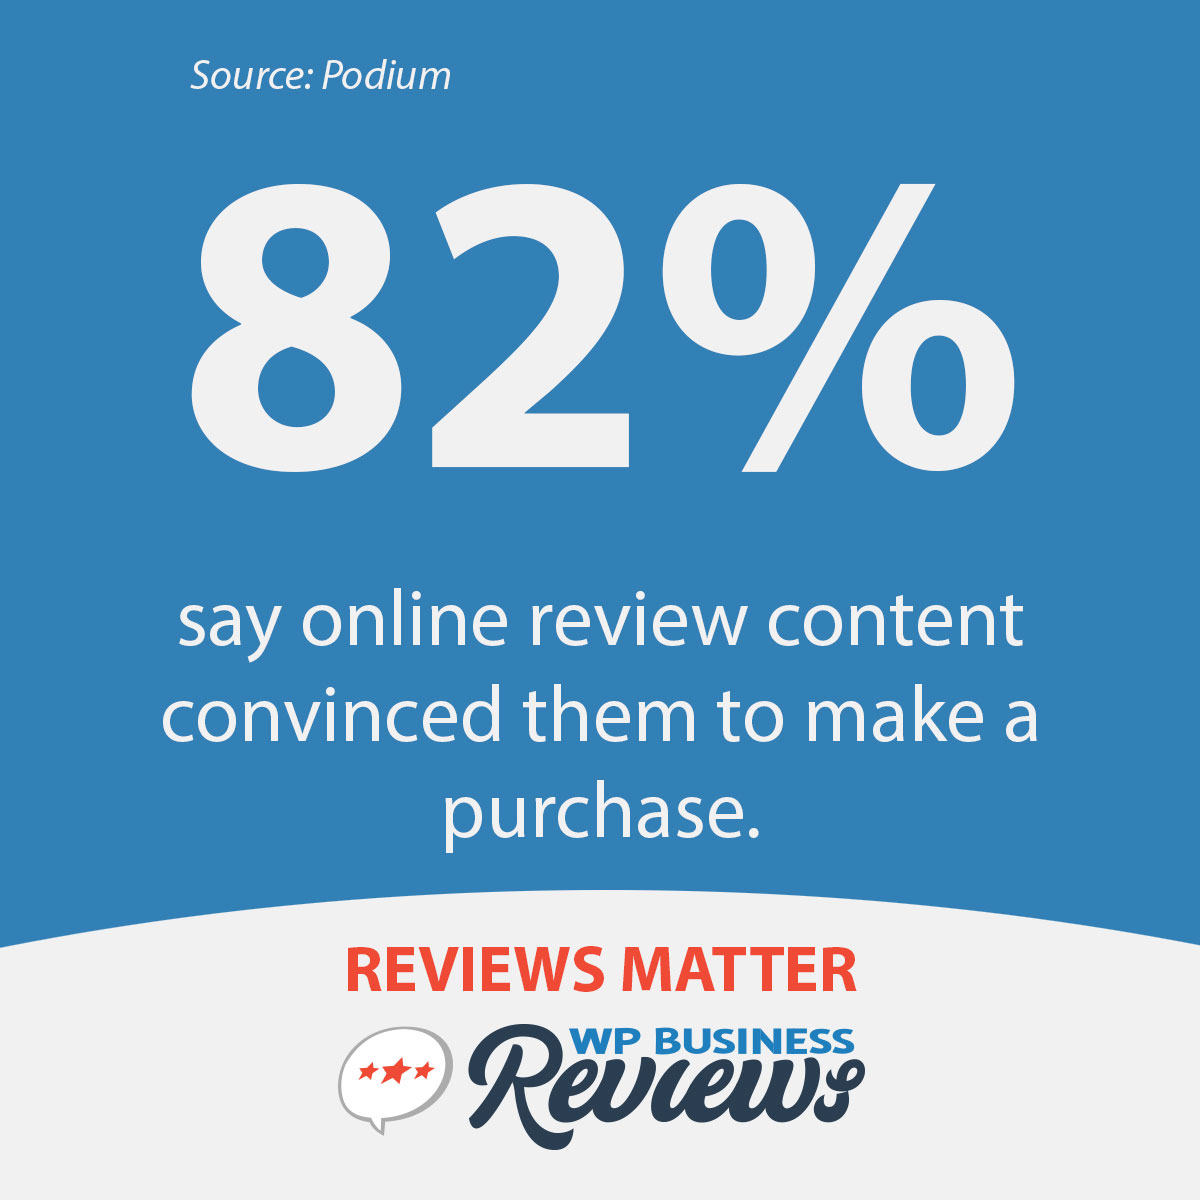 According to Podium, 82% of people say online review content convinced them to make a purchase.